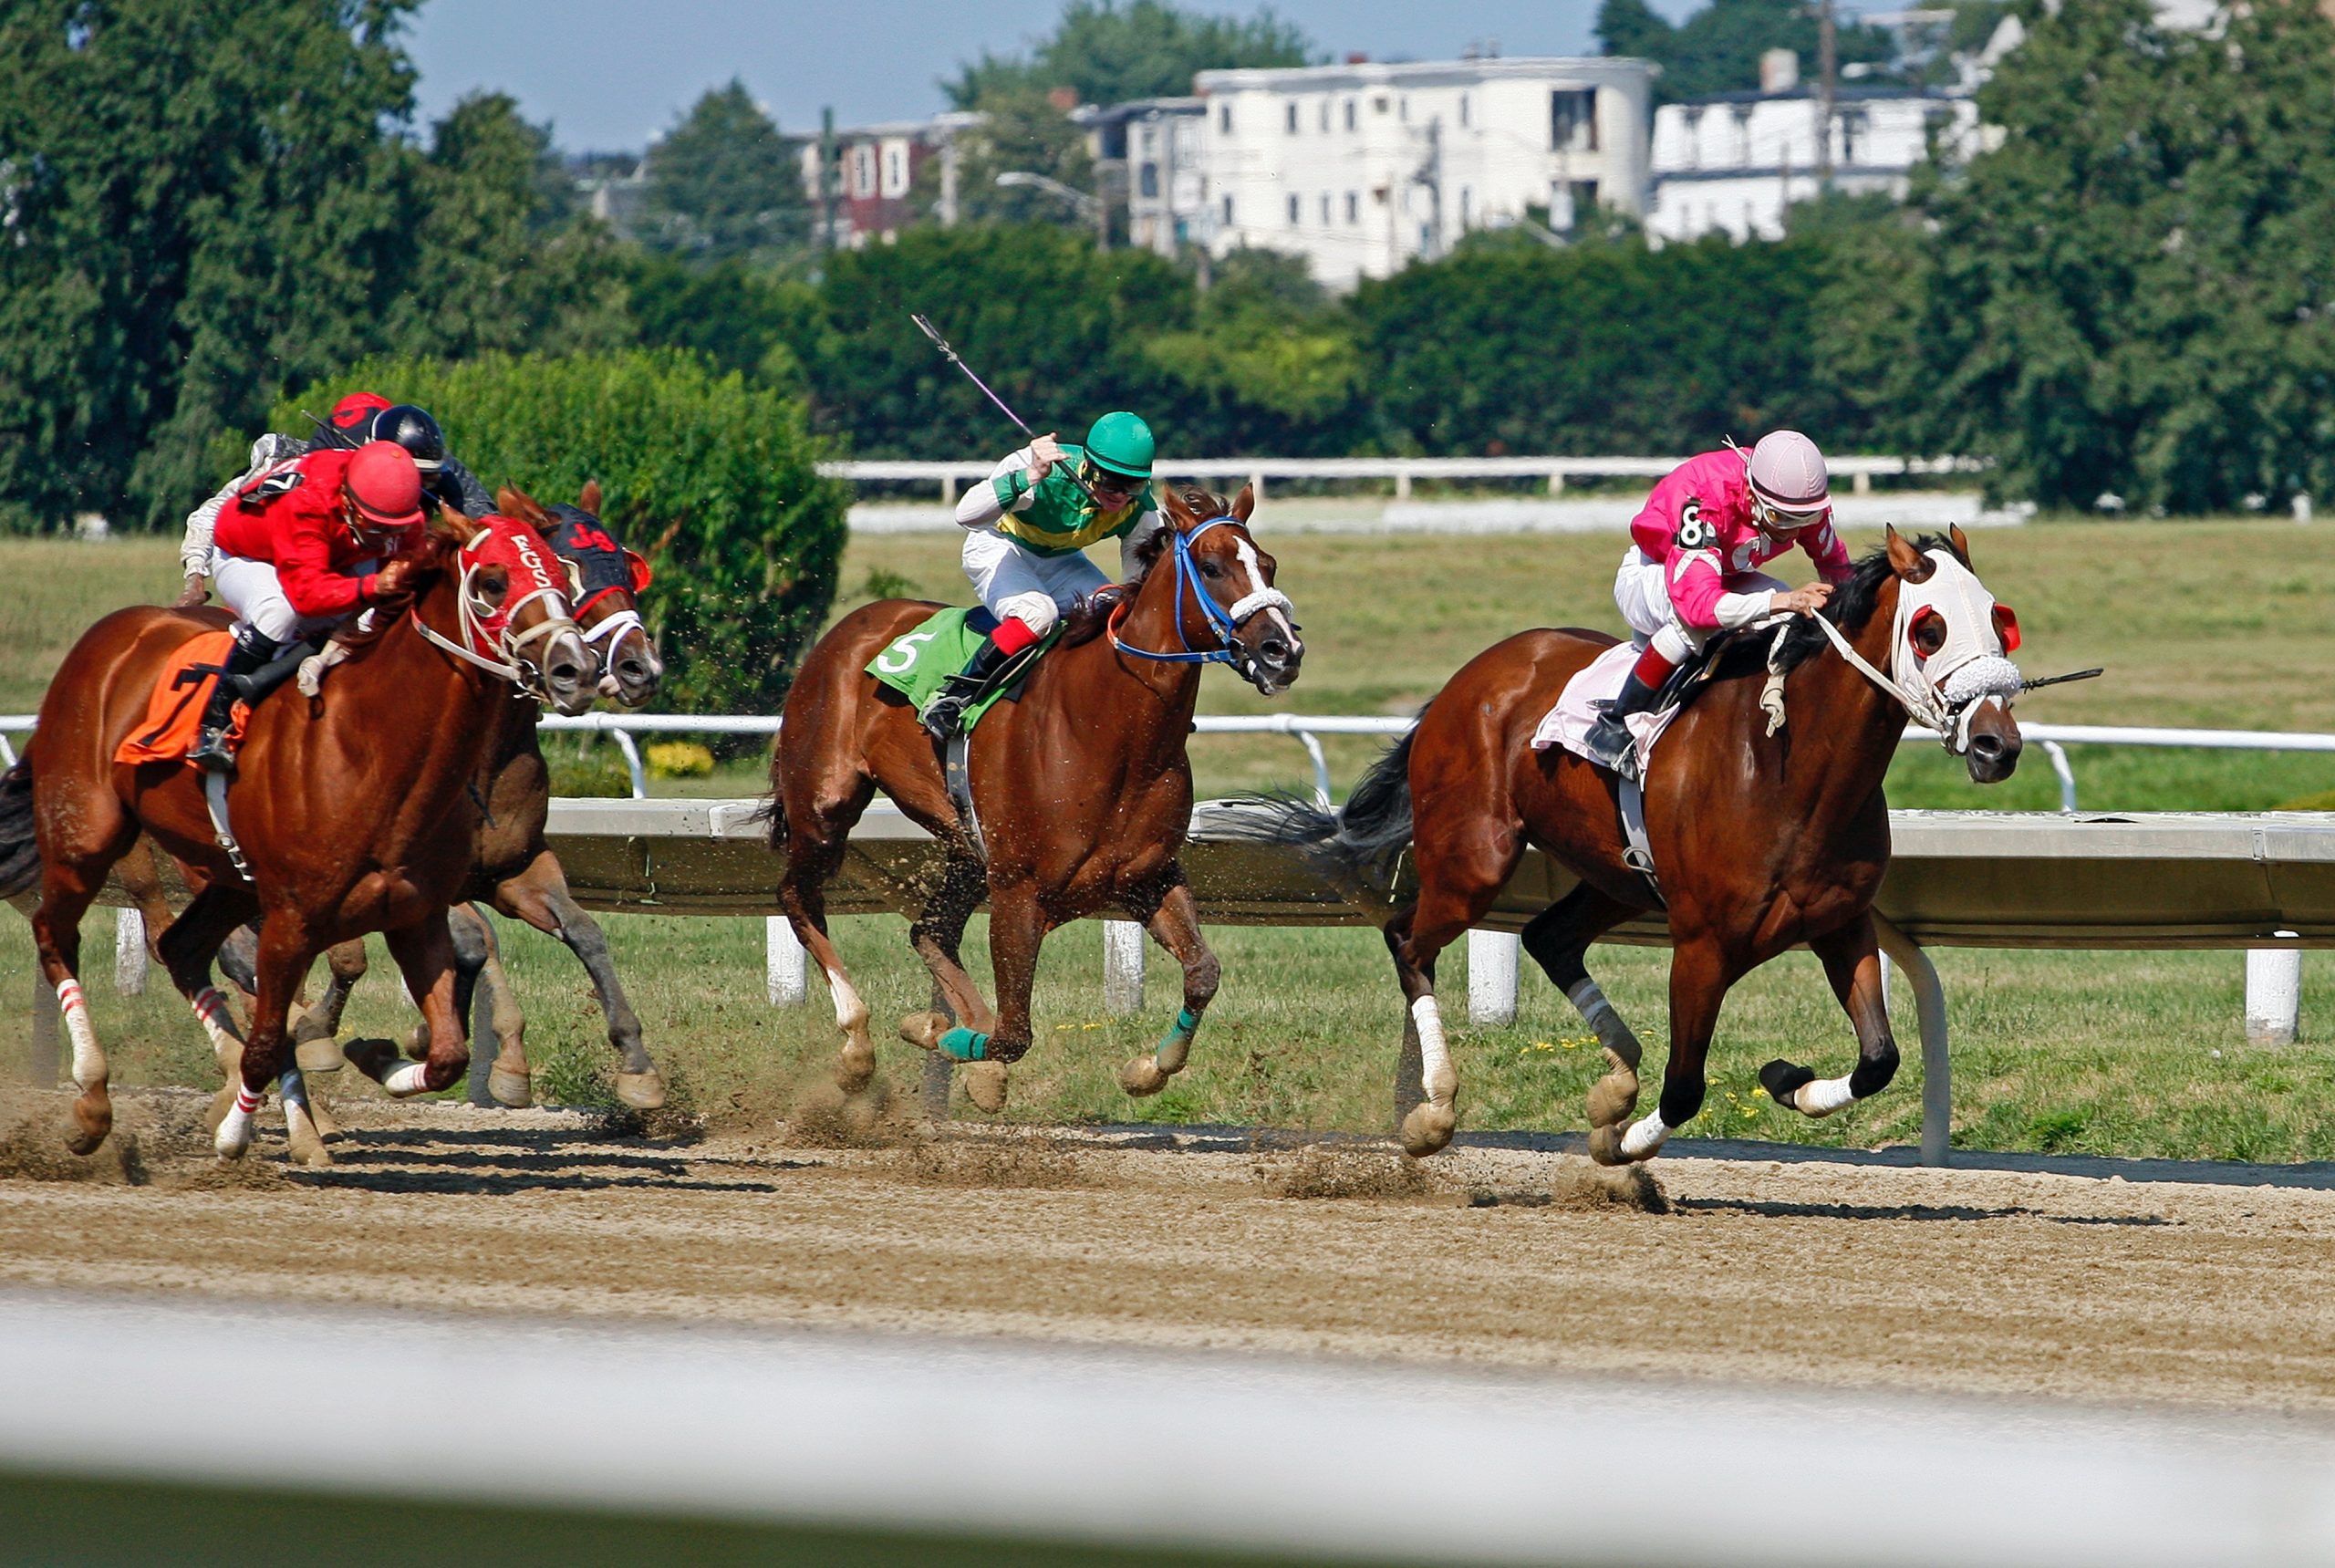 Filly winning the preakness stakes